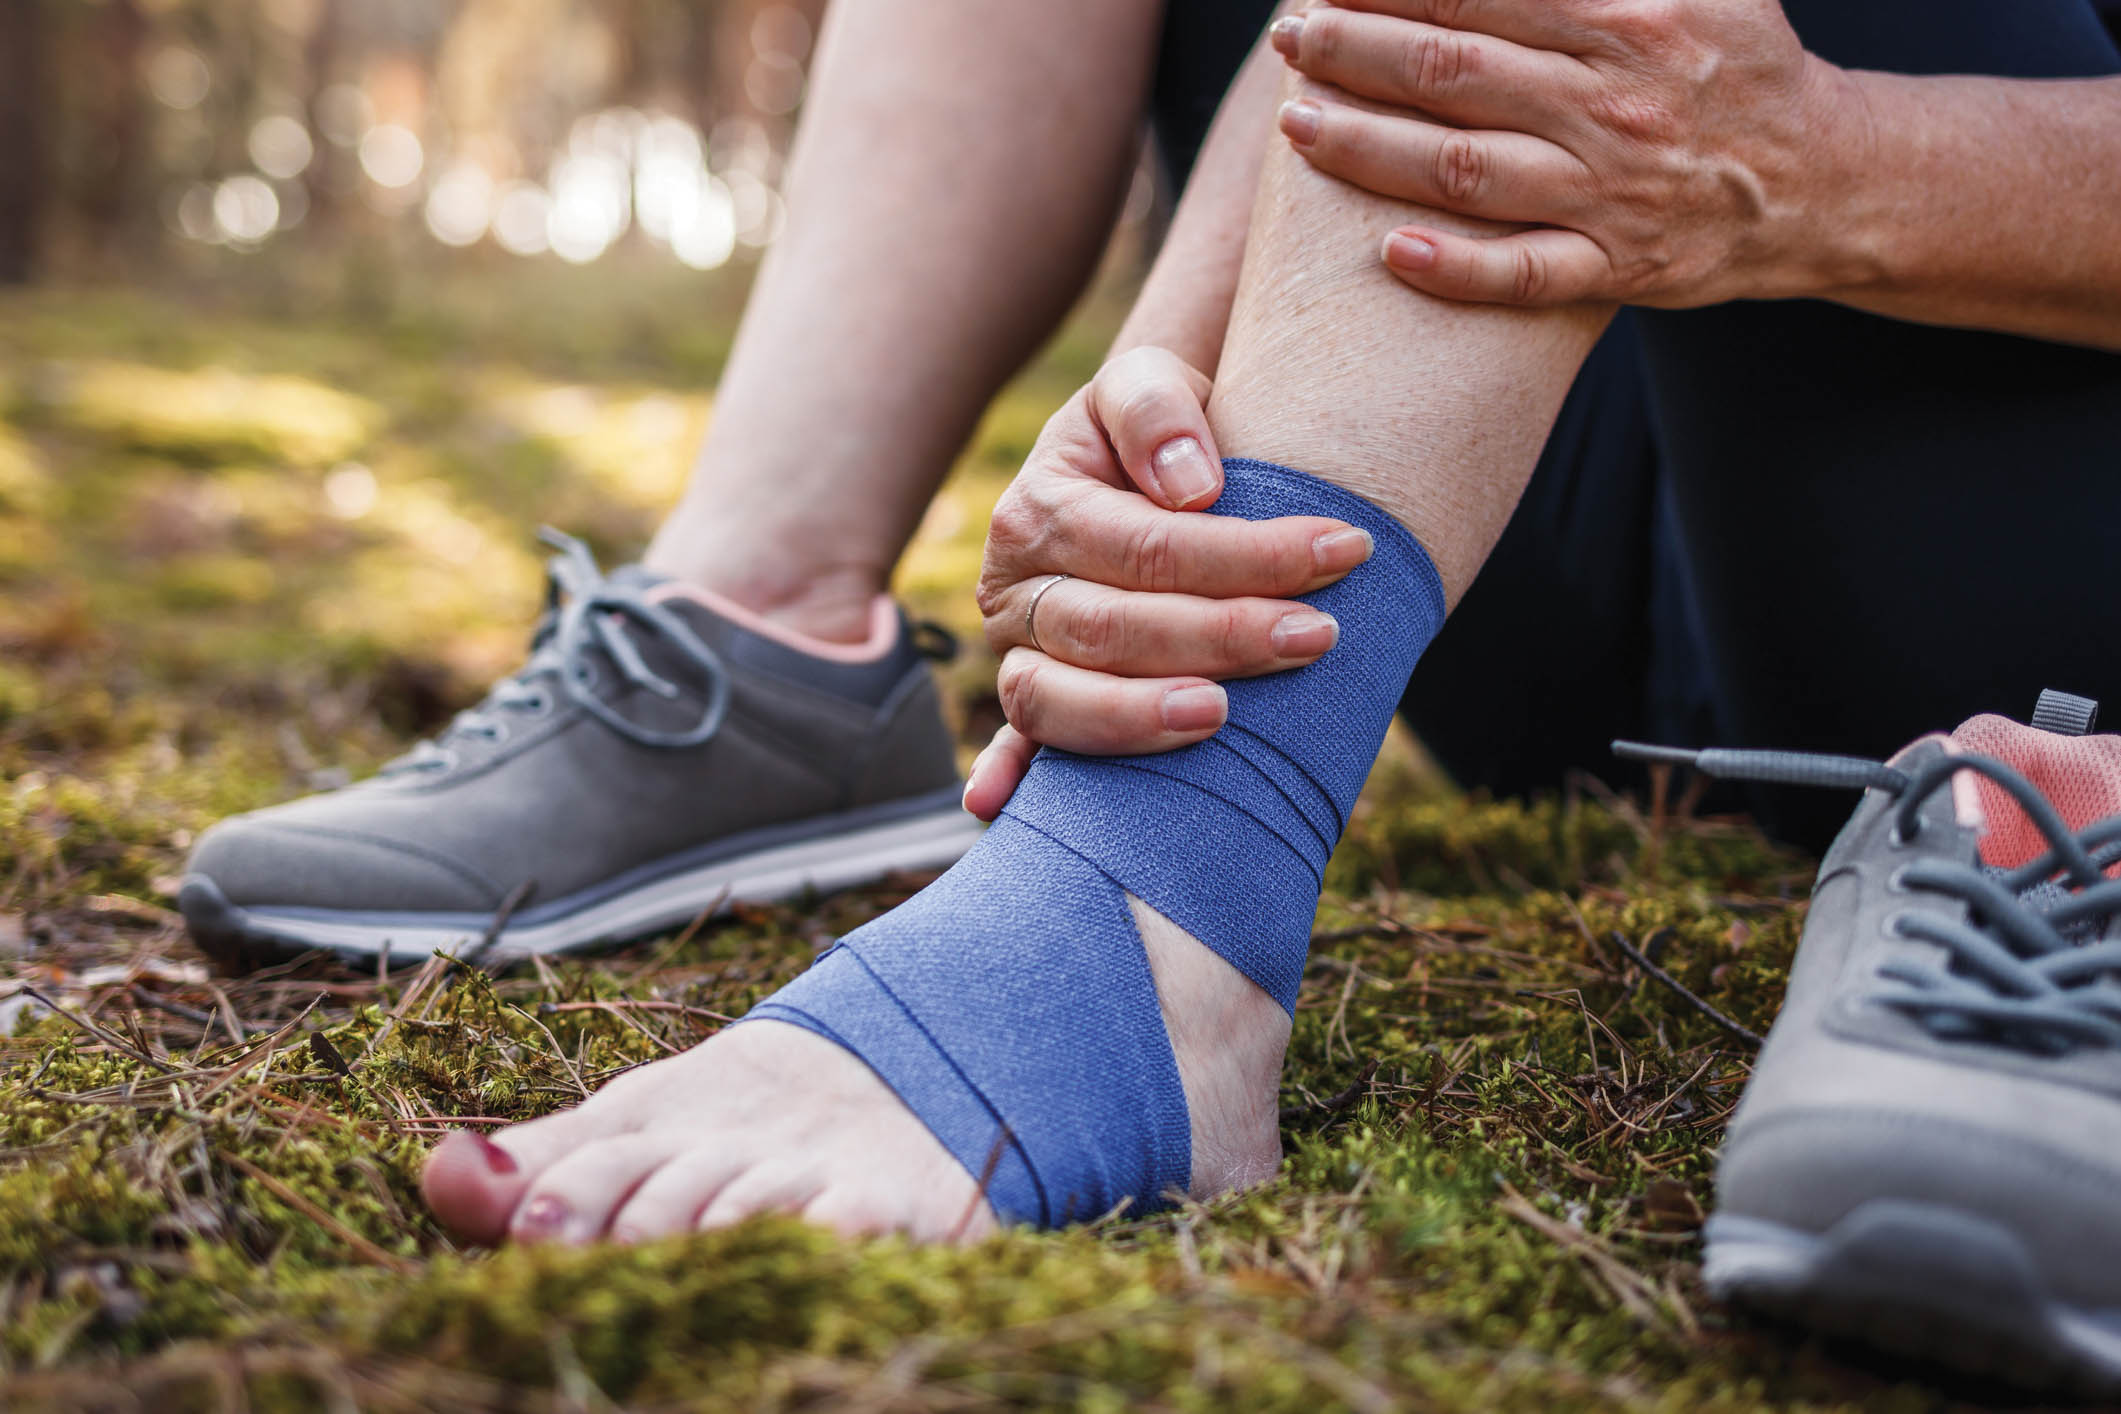 Sprain ankle during hiking in nature. Woman feeling pain after accident injury outdoors.